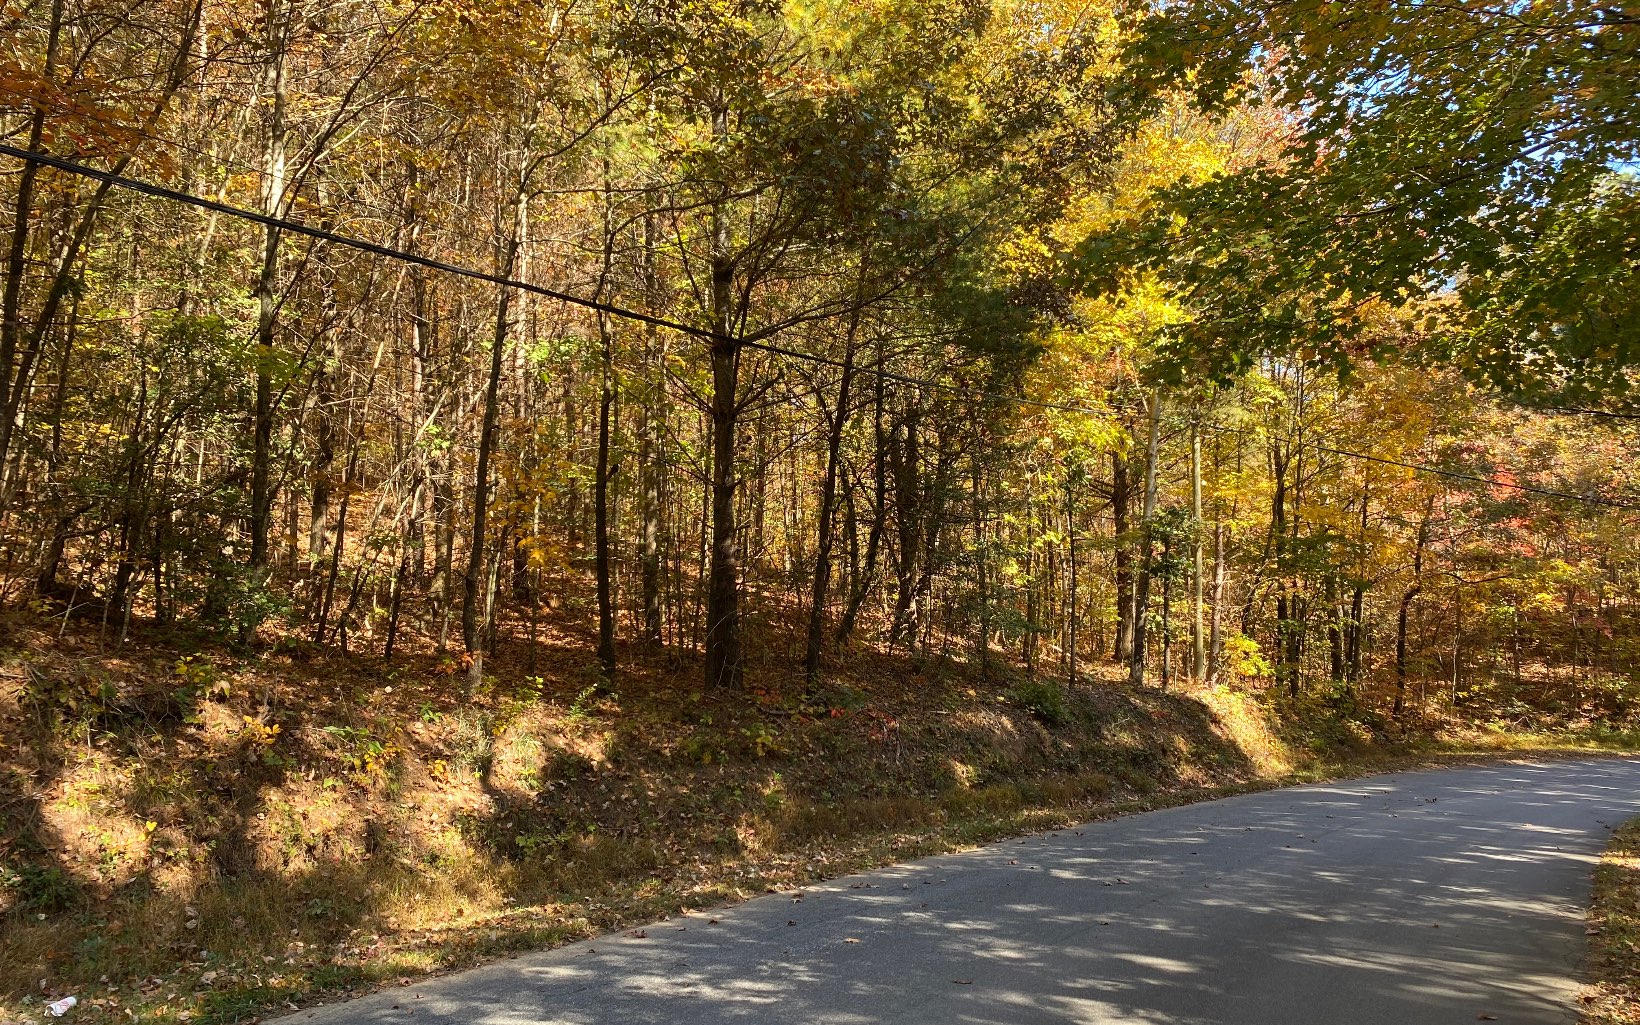 UNRESTRICTED NORTH GEORGIA MOUNTAIN ACREAGE - This 13.94 Acres features Very Gentle Terrain, Large Hardwoods, Paved Road Frontage, Easy Access, Close to Downtown Ellijay and Shopping/Restaurants.